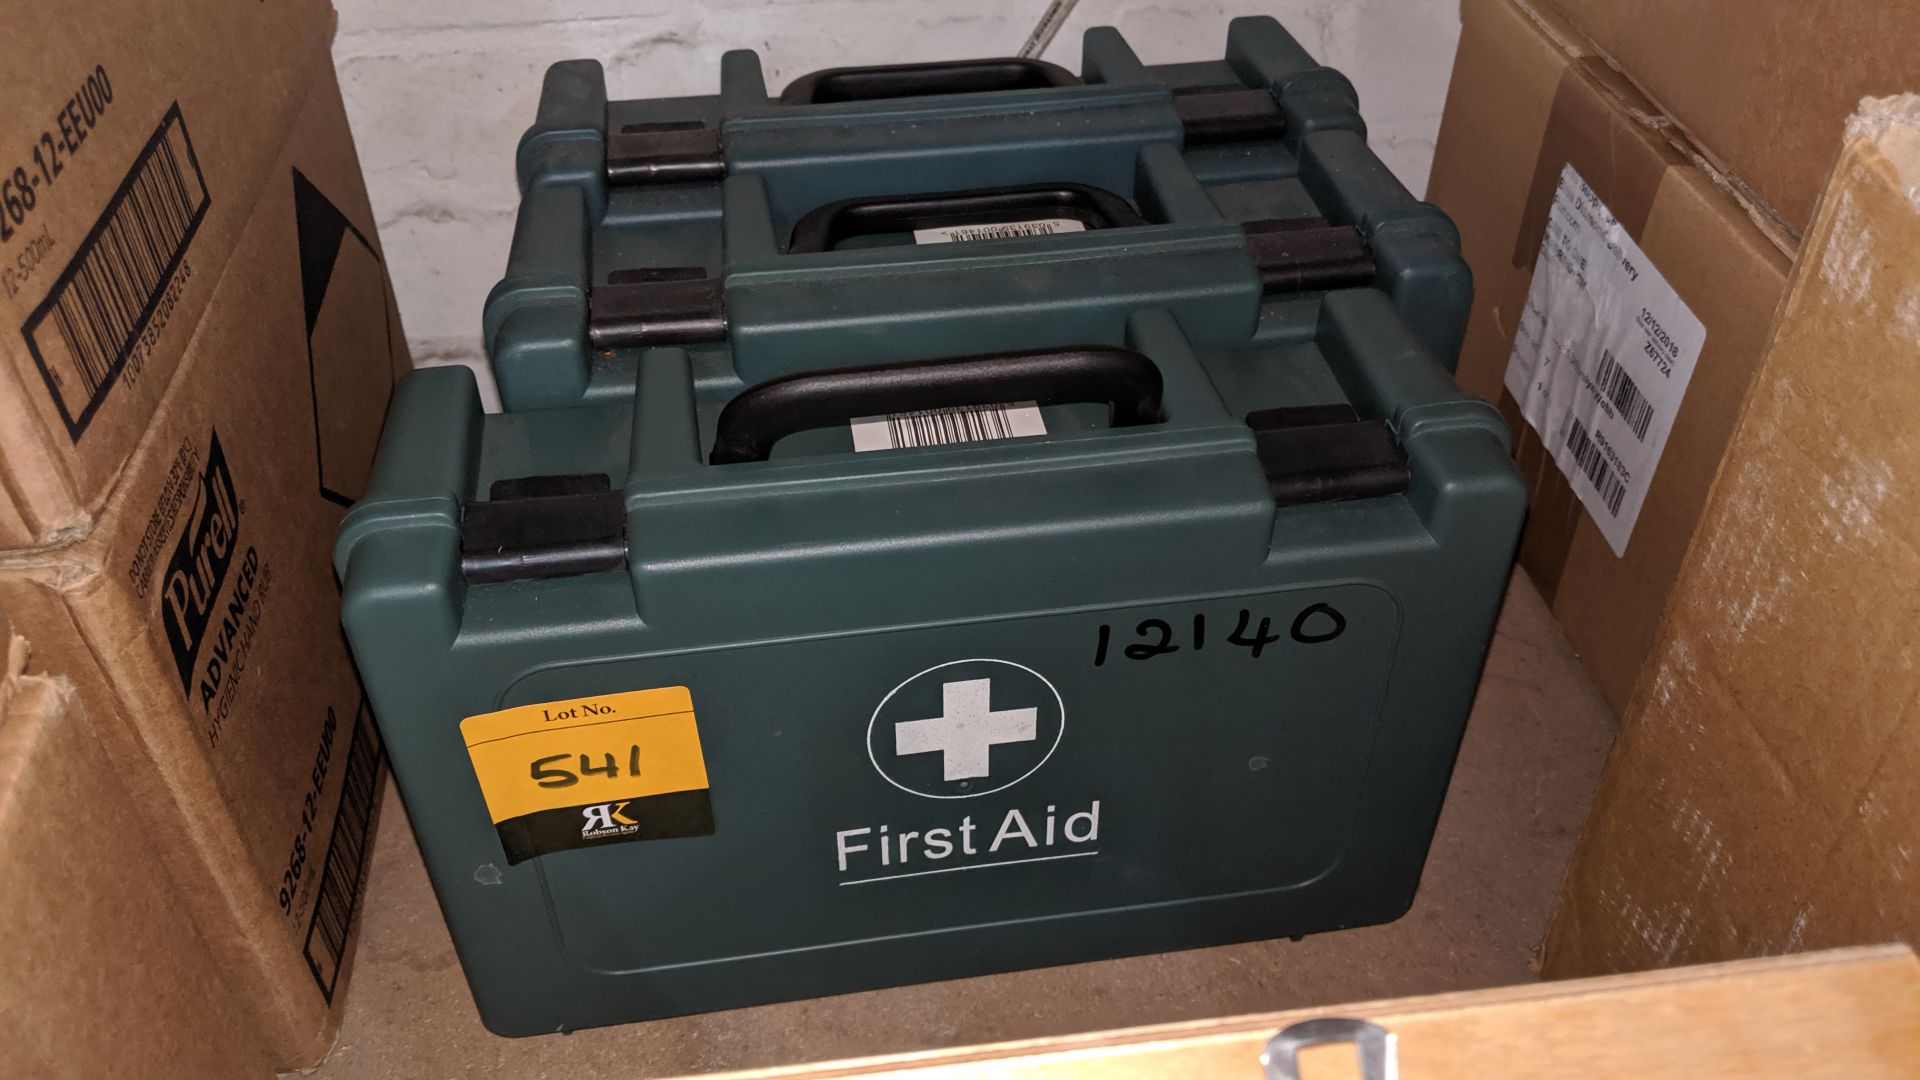 3 off first aid kits and contents. This is one of a large number of lots used/owned by One To One (